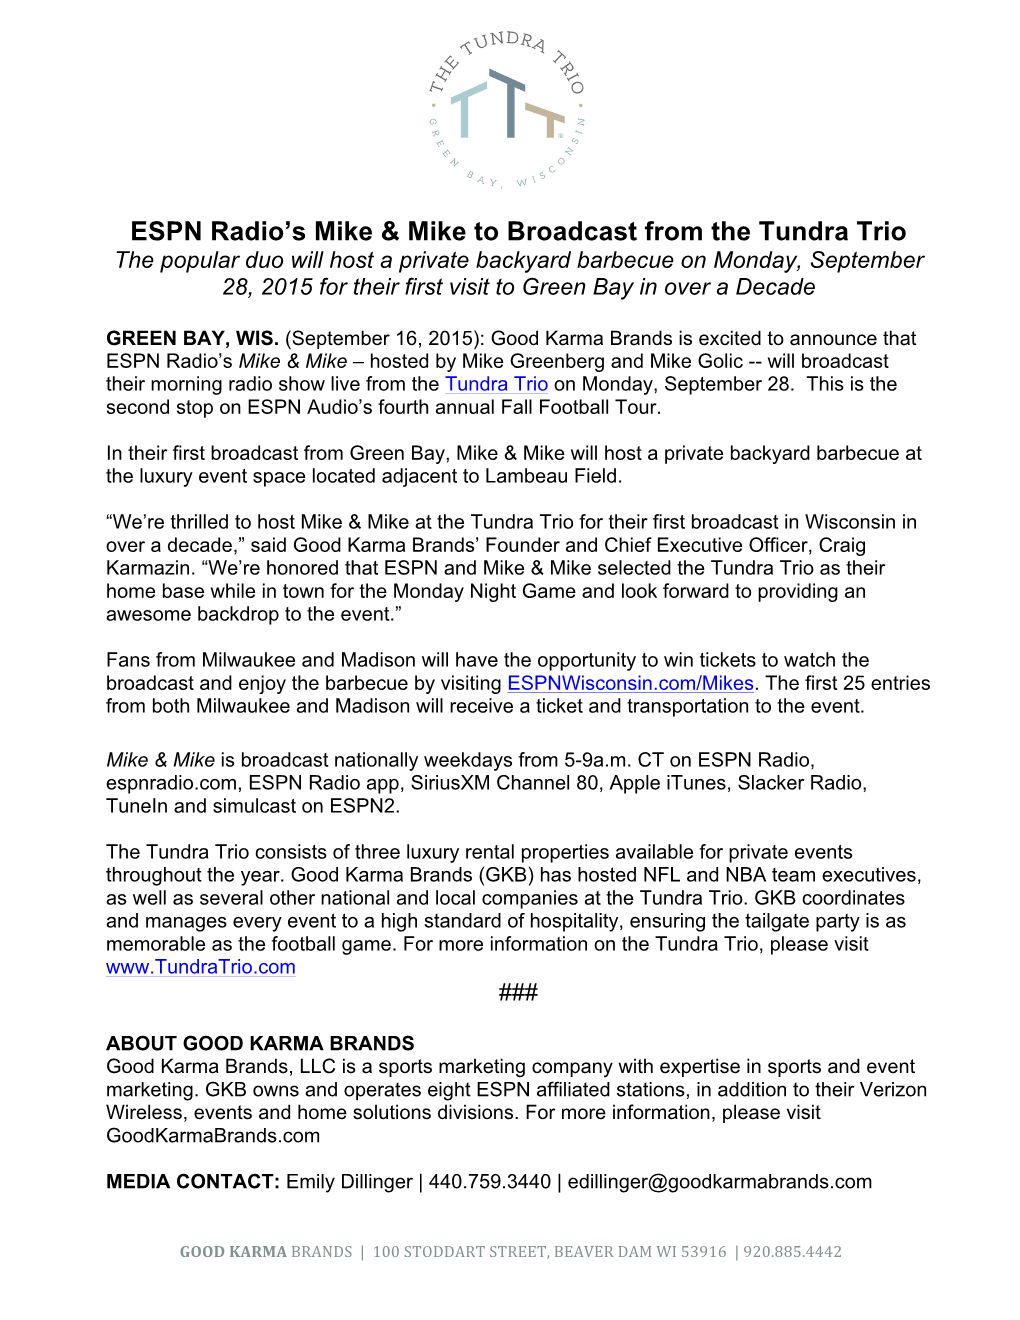 ESPN Radio's Mike & Mike to Broadcast from the Tundra Trio